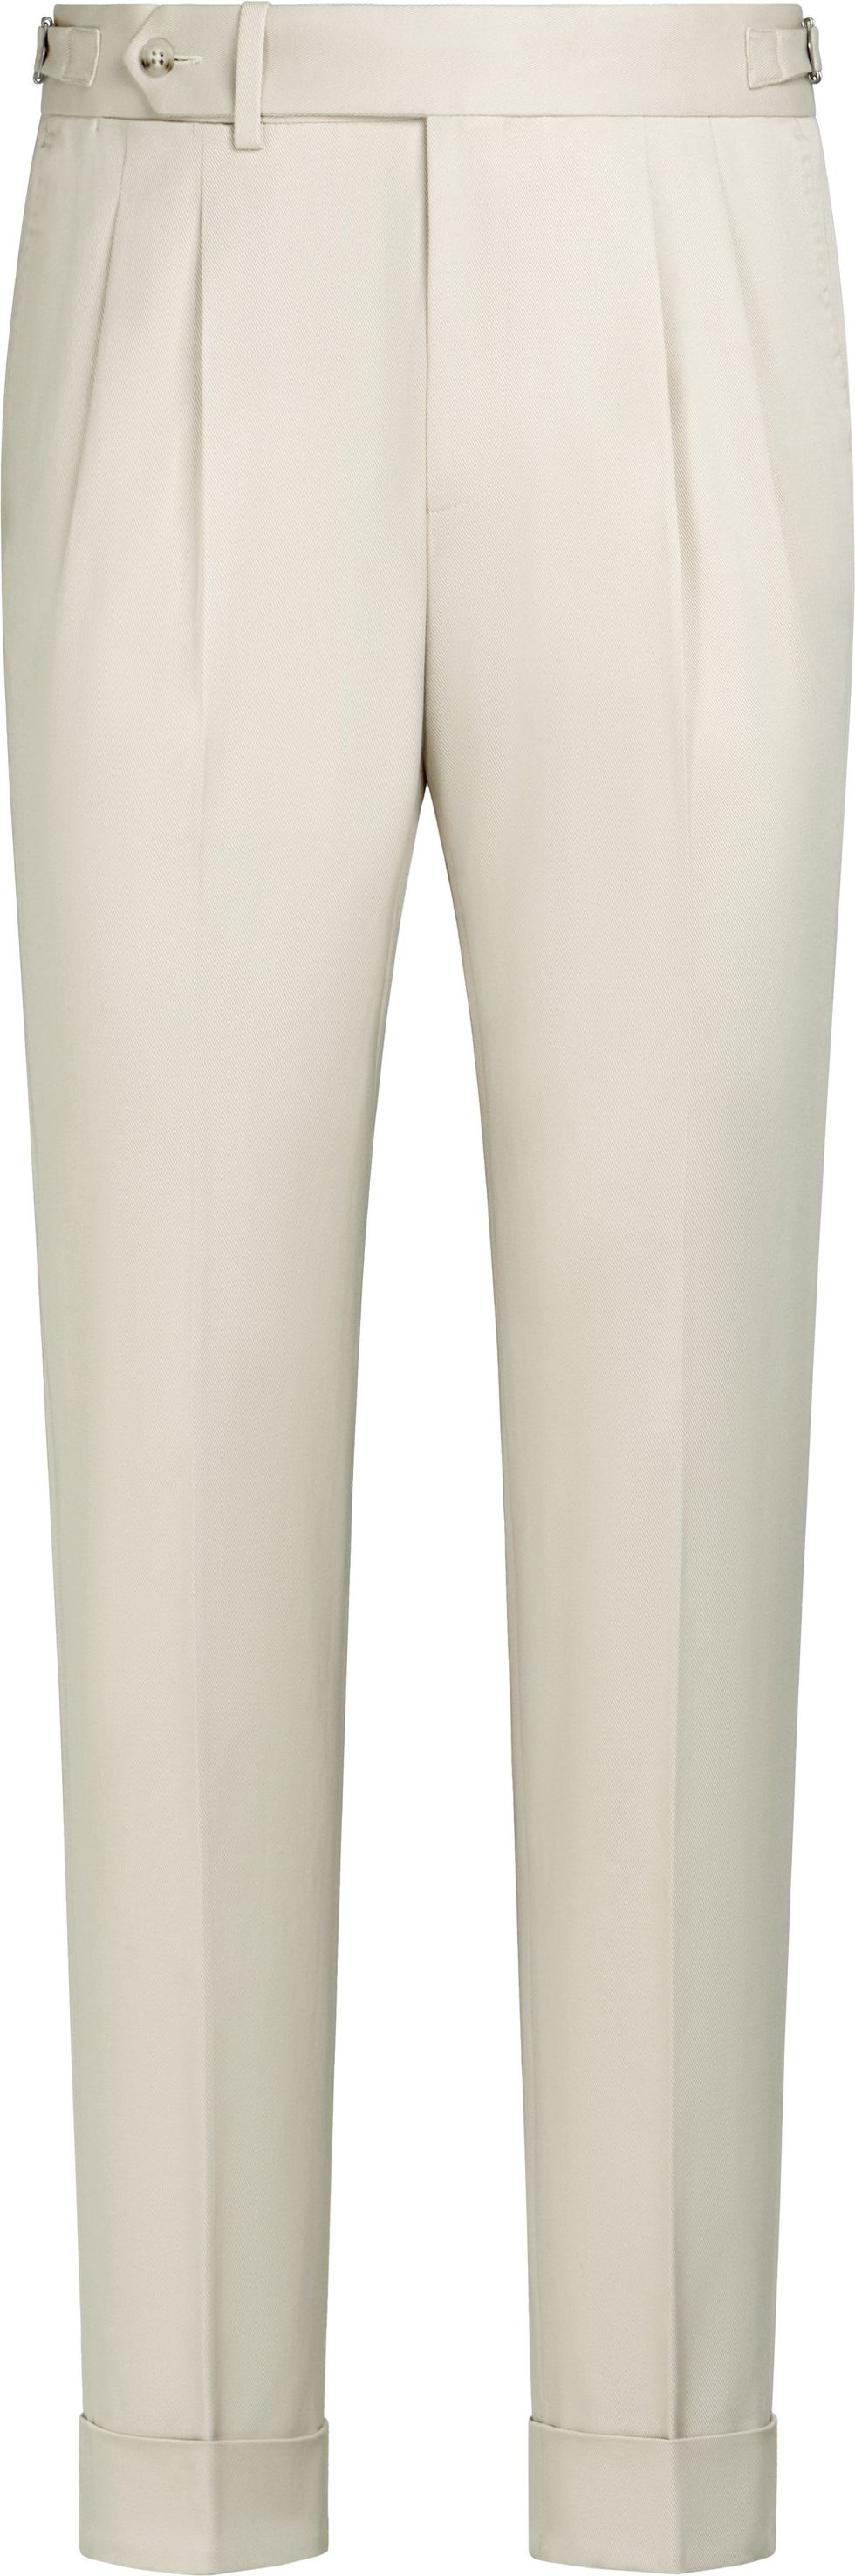 Timeless Sophistication and Versatility with these Suitsupply Trousers